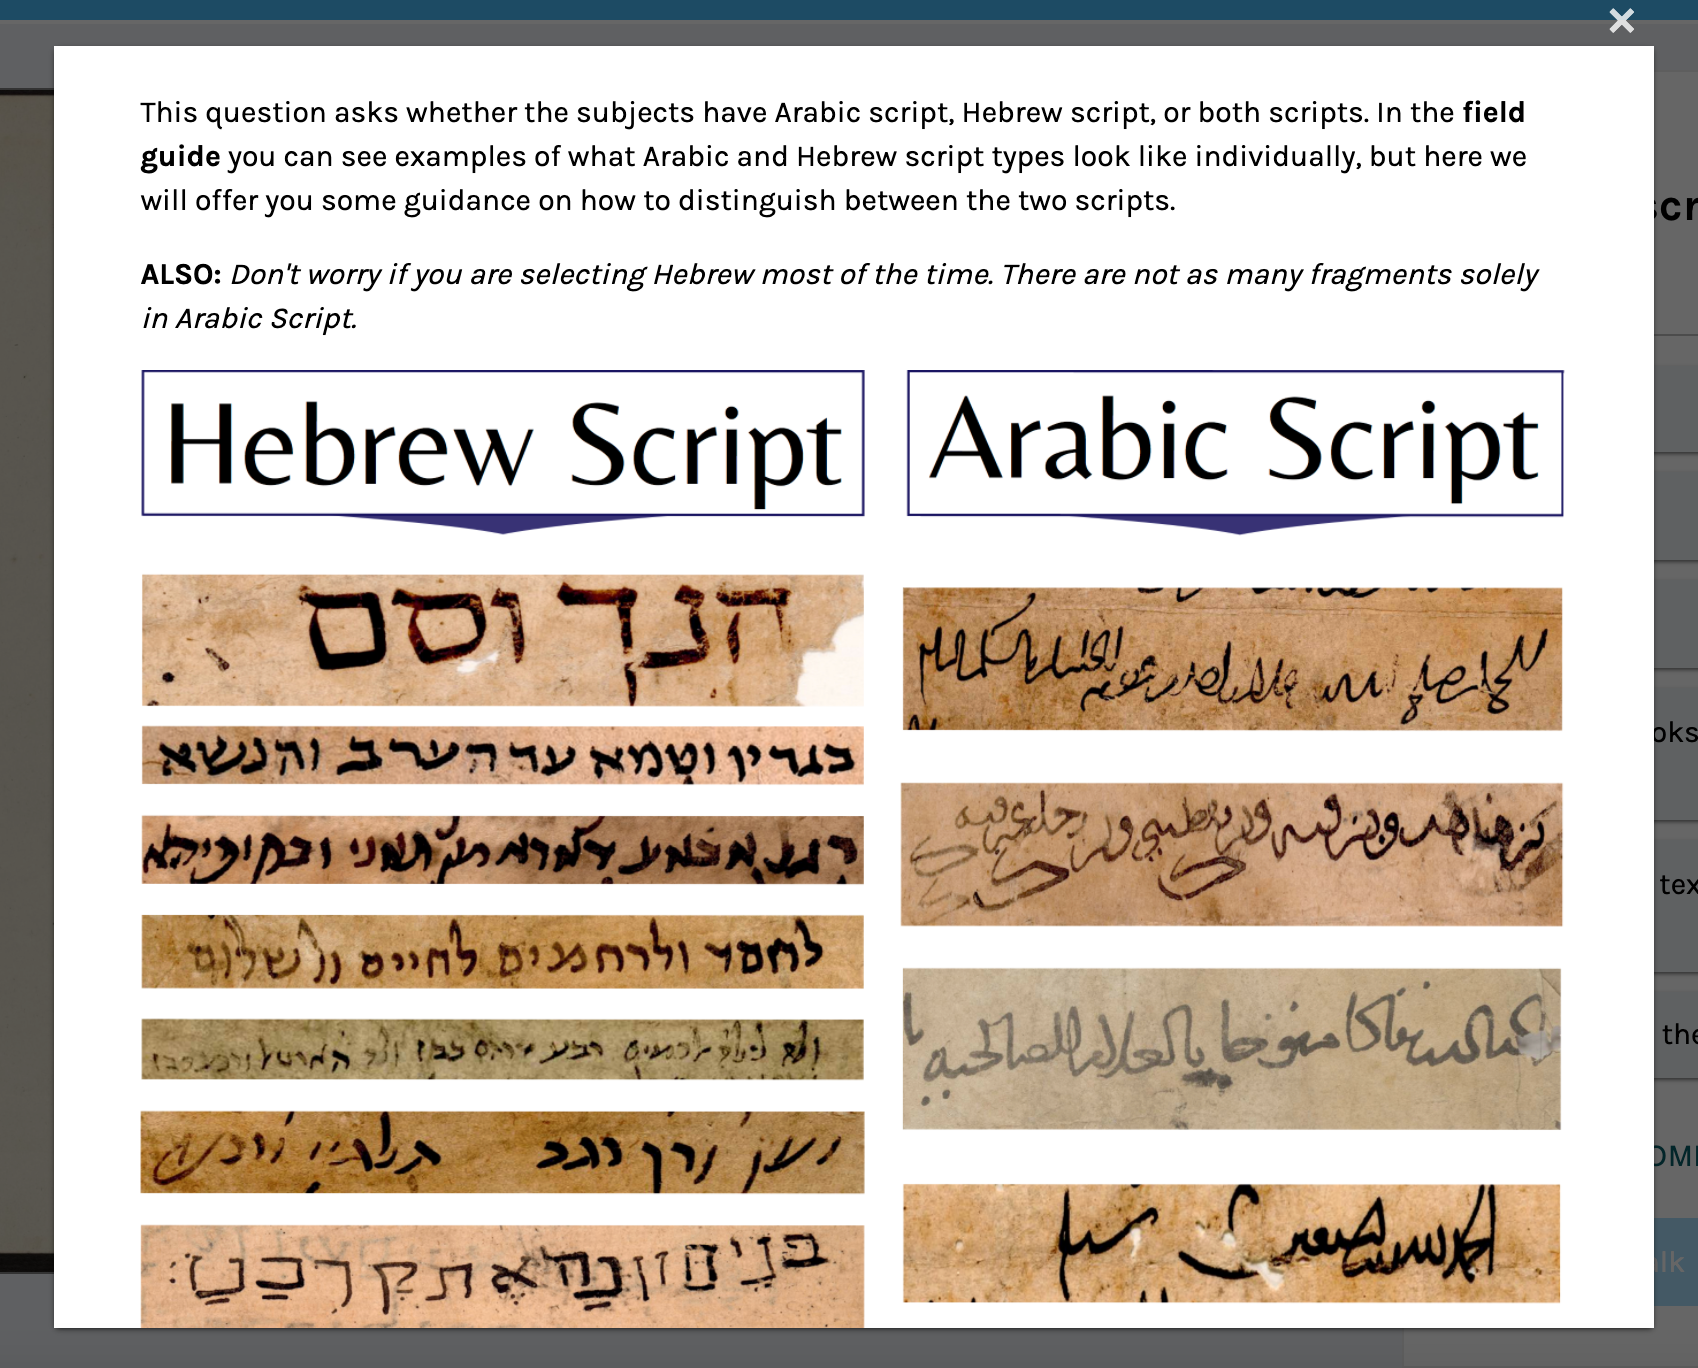 Two columns of screenshots from Geniza fragments displaying Hebrew and Arabic script examples.